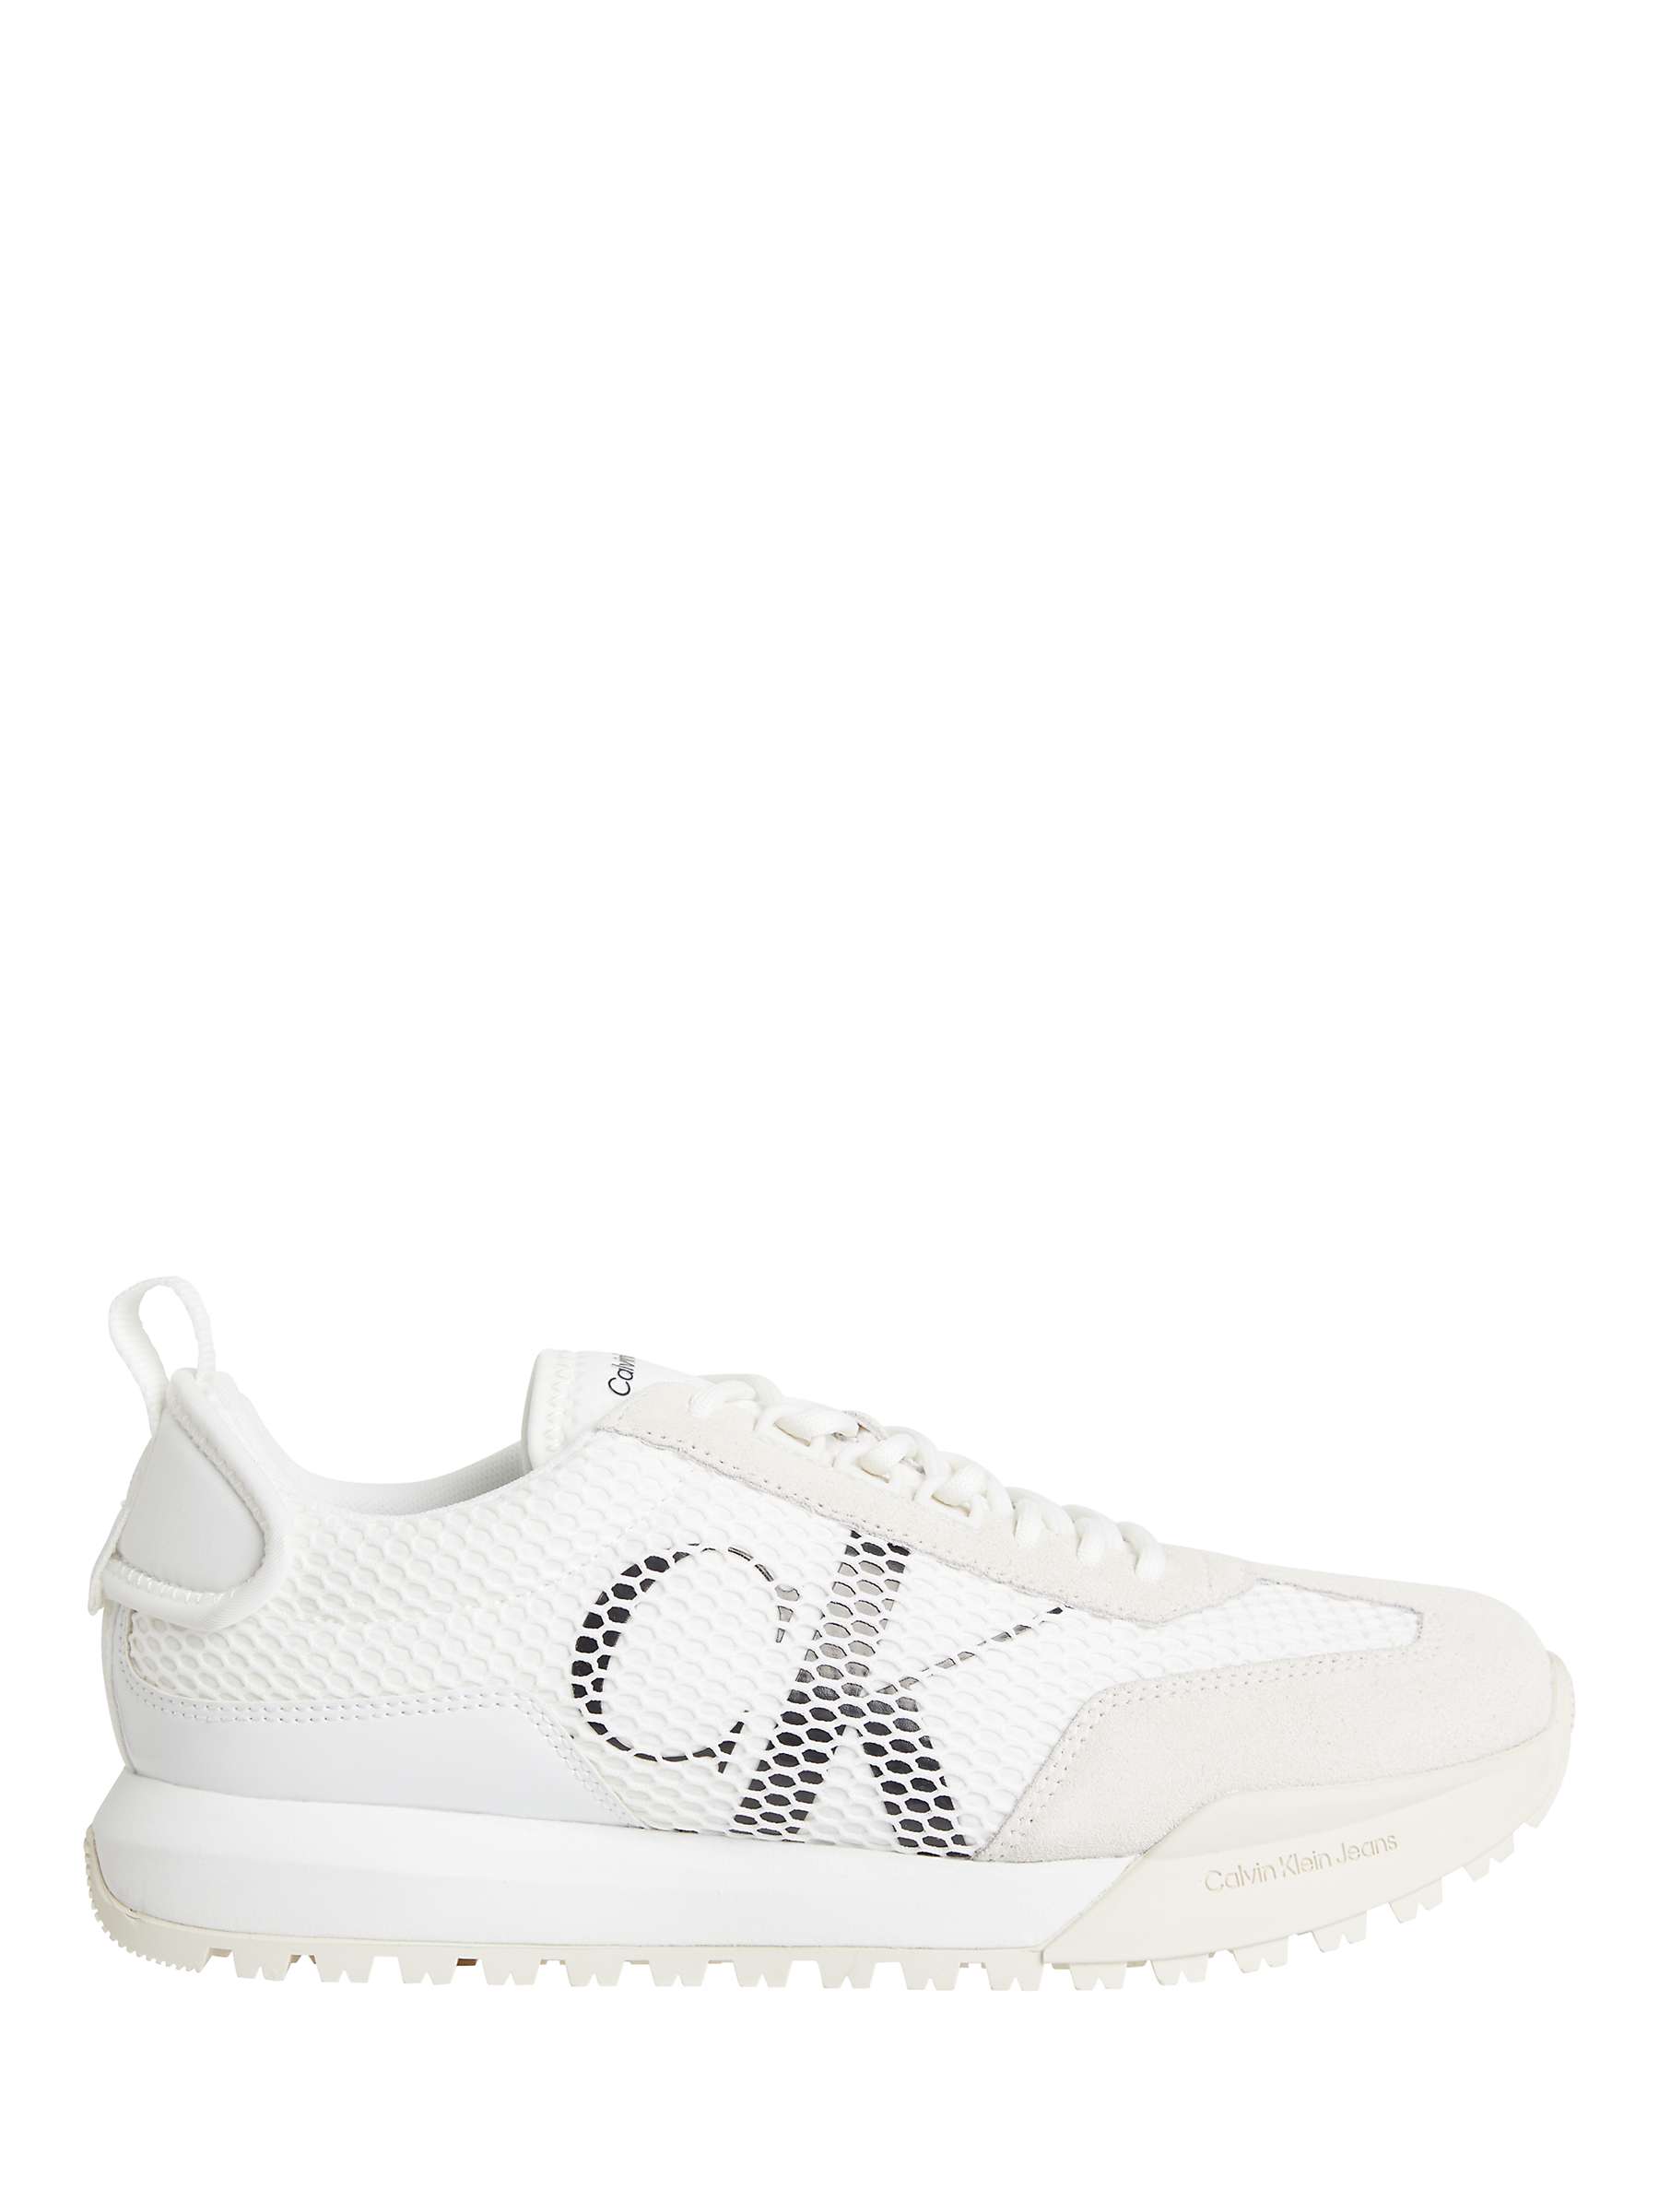 Buy Calvin Klein Recycled Lace Up Runner Trainers, White/Creamy White Online at johnlewis.com